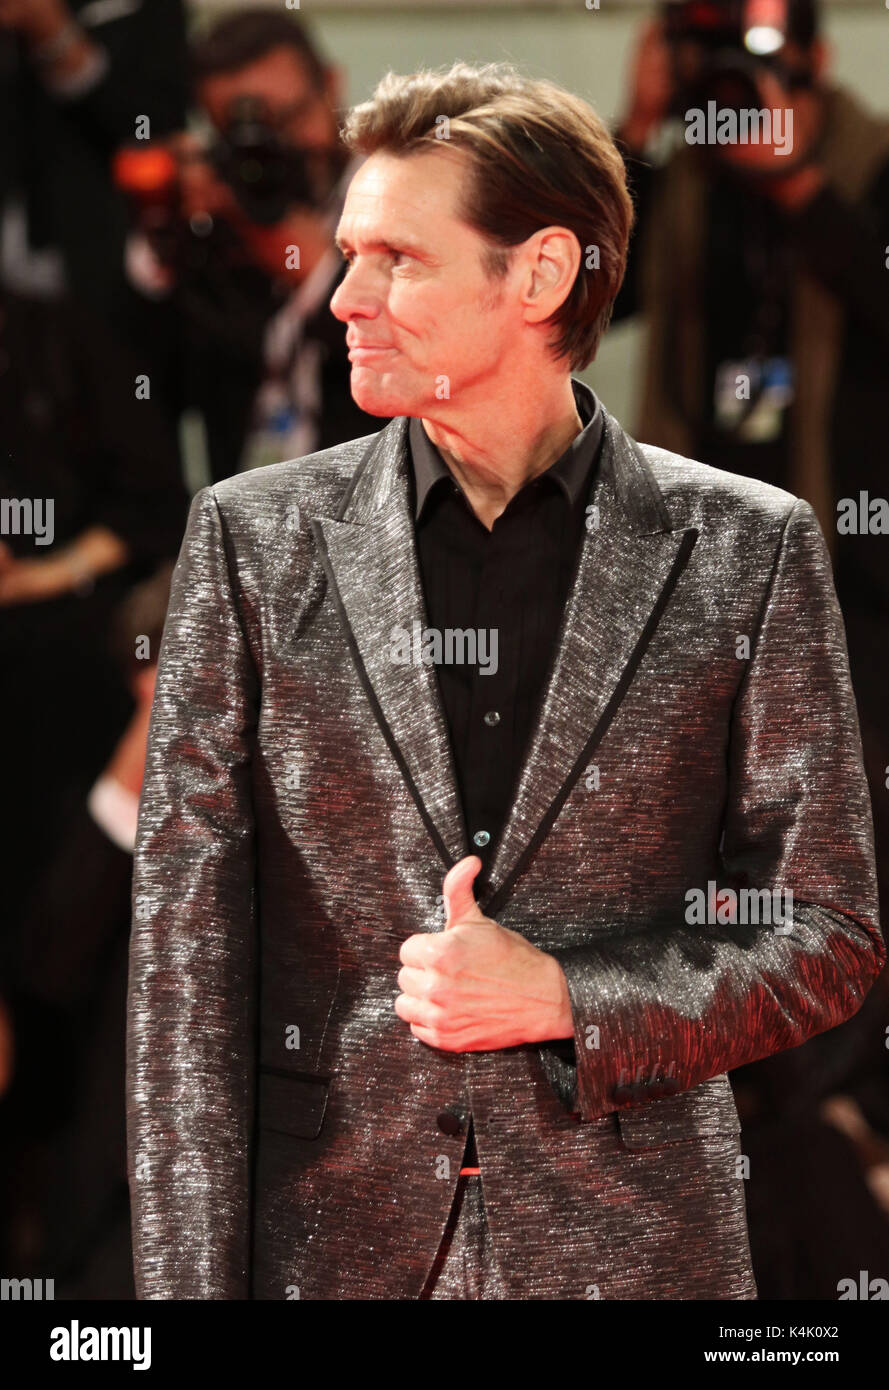 Europe, Italy, Lido di Venezia, 05 september, 2017 : the actor Jim Carrey at the red carpet of the movie 'Jim and Andy : the great beyond' , director Chris Smith, 74th Venice International Film Festival    Credit © Ottavia Da Re/Sintesi/Alamy Live News Stock Photo